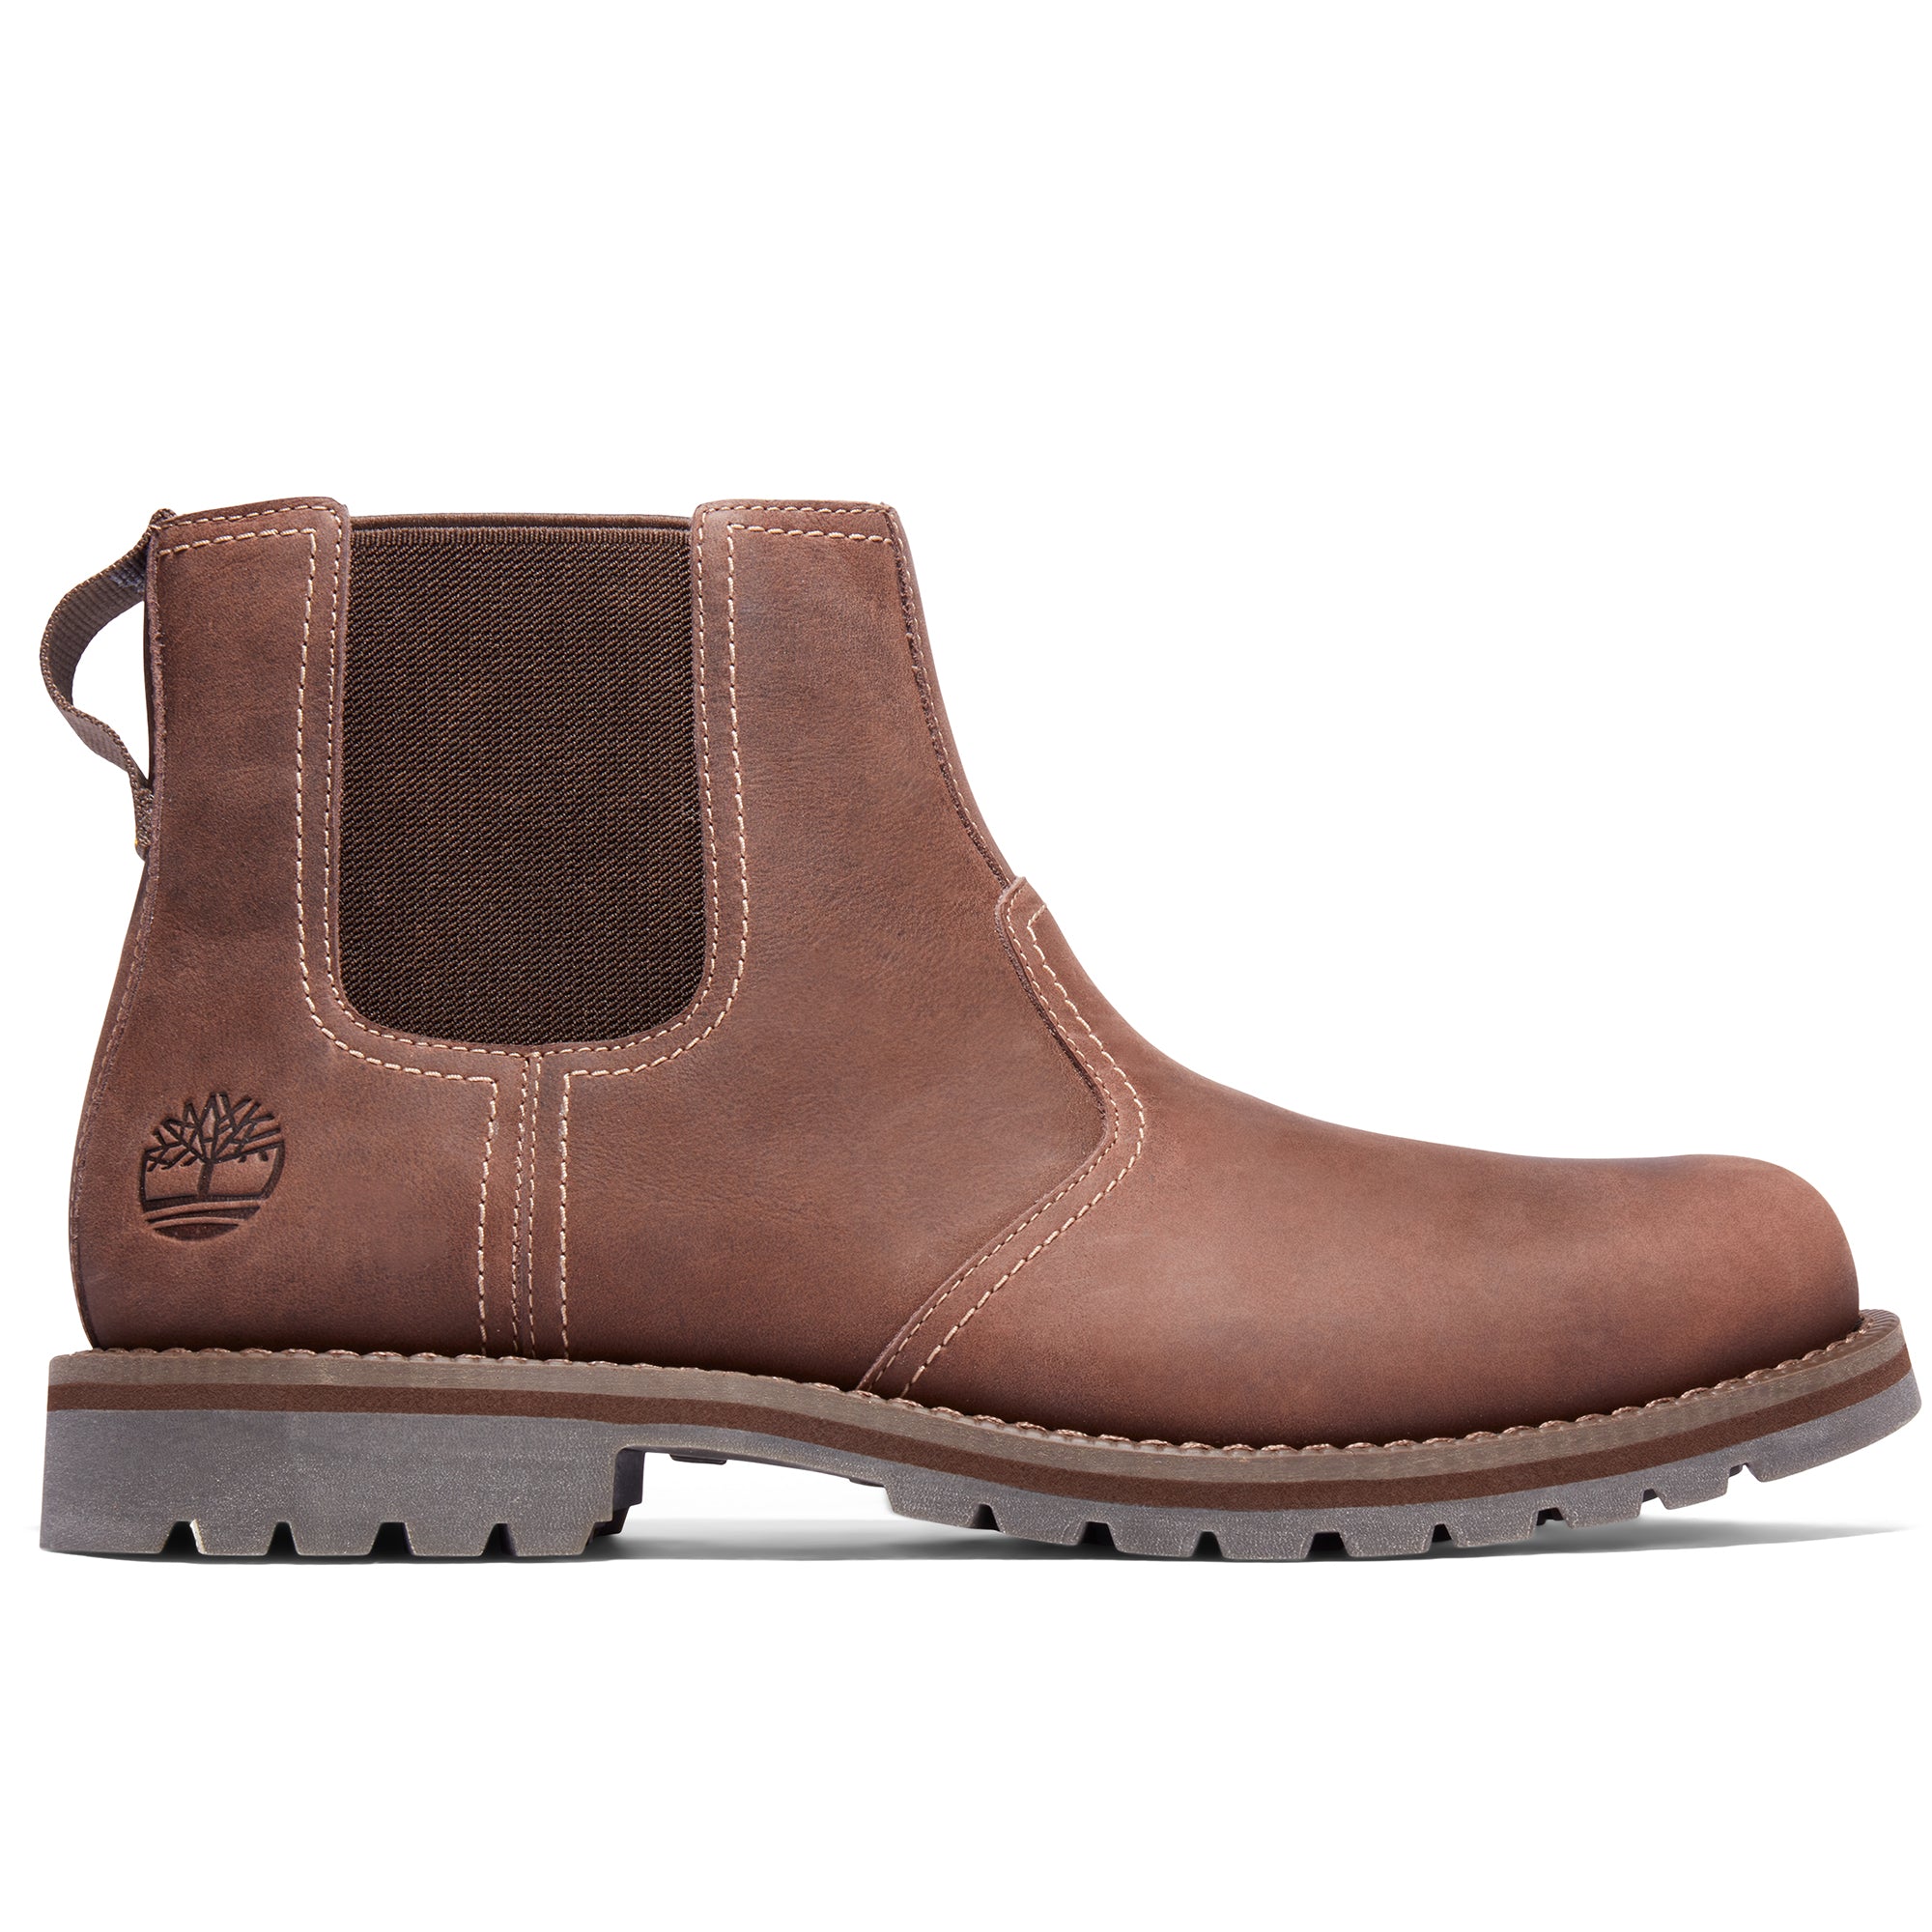 Timberland Larchmont II Chelsea Boot - Mid Brown Full Grain